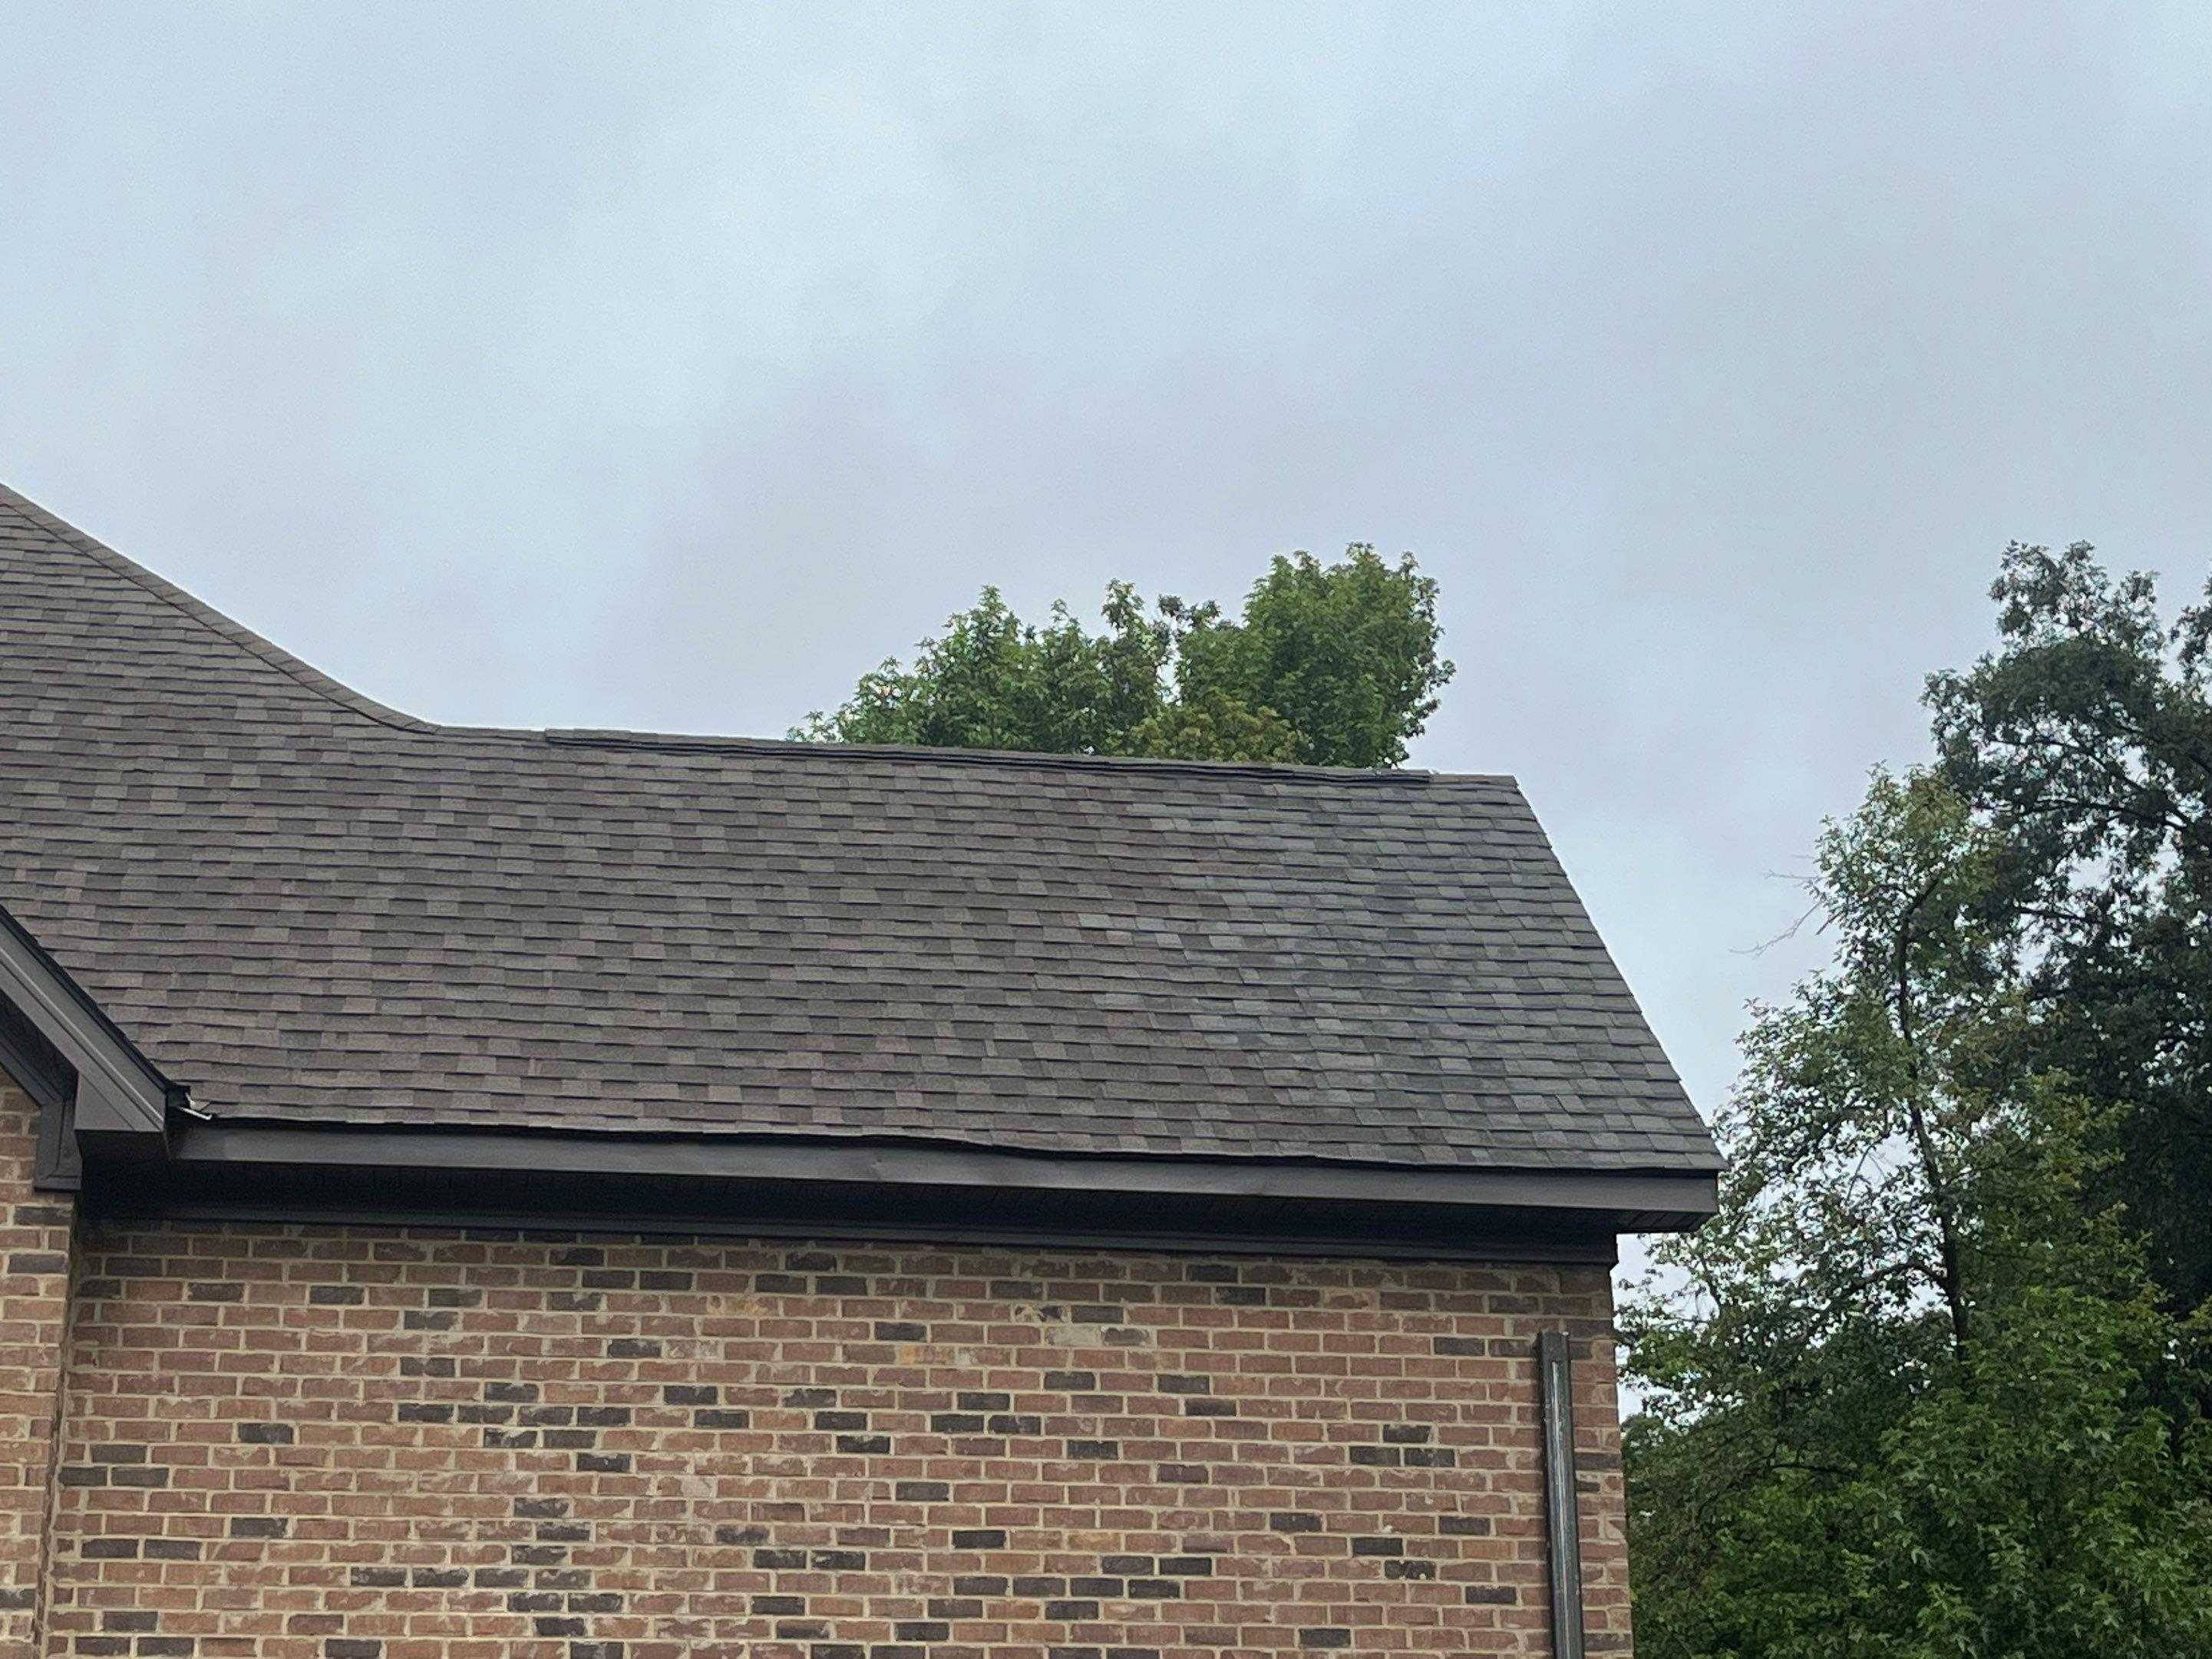 Best matched color shingles and repaired roof line